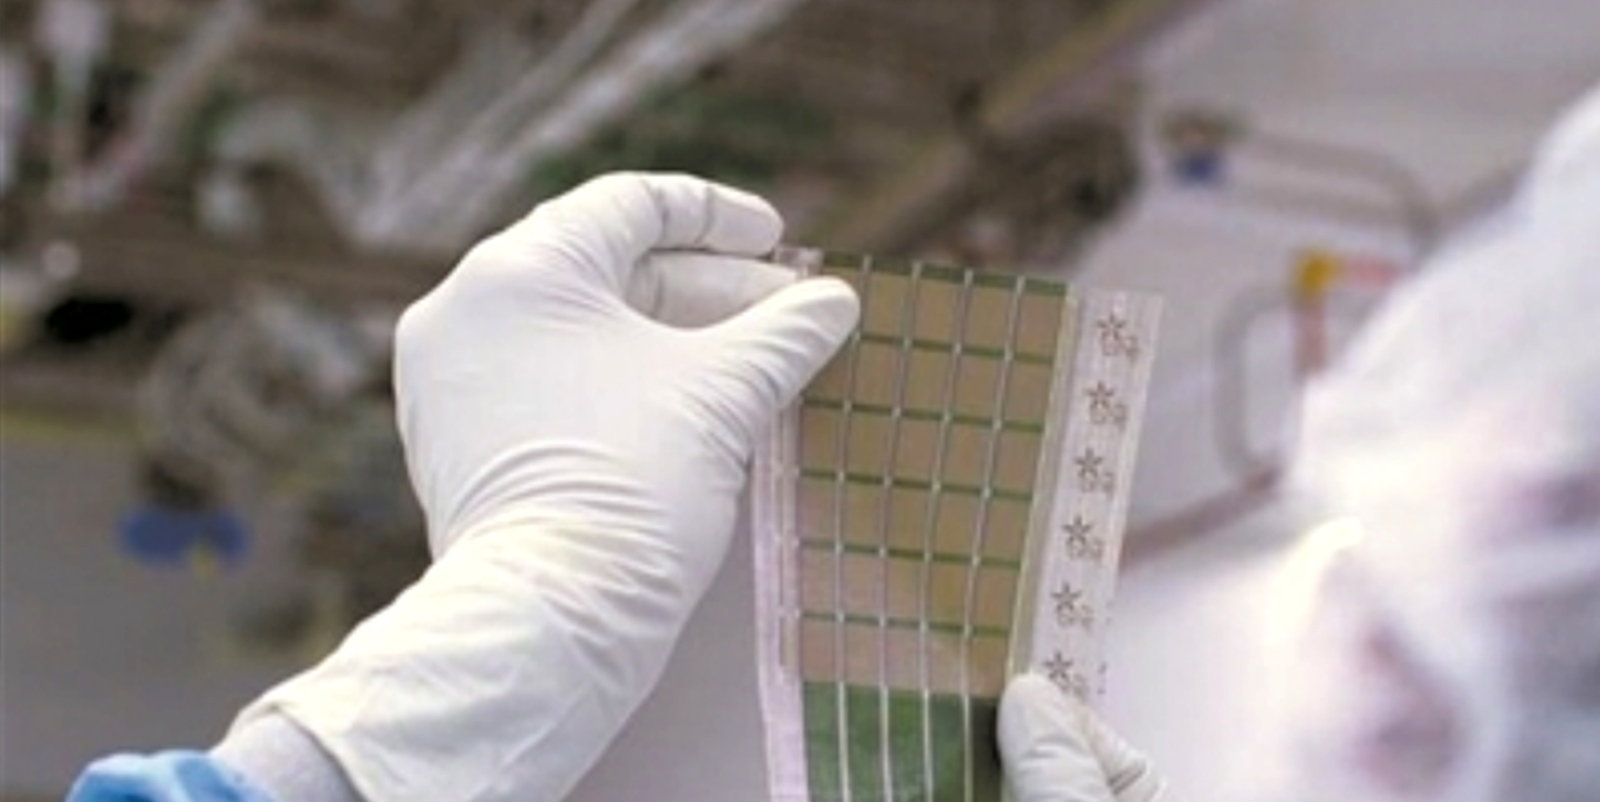 Ultralight solar cells could turn surfaces into power sources